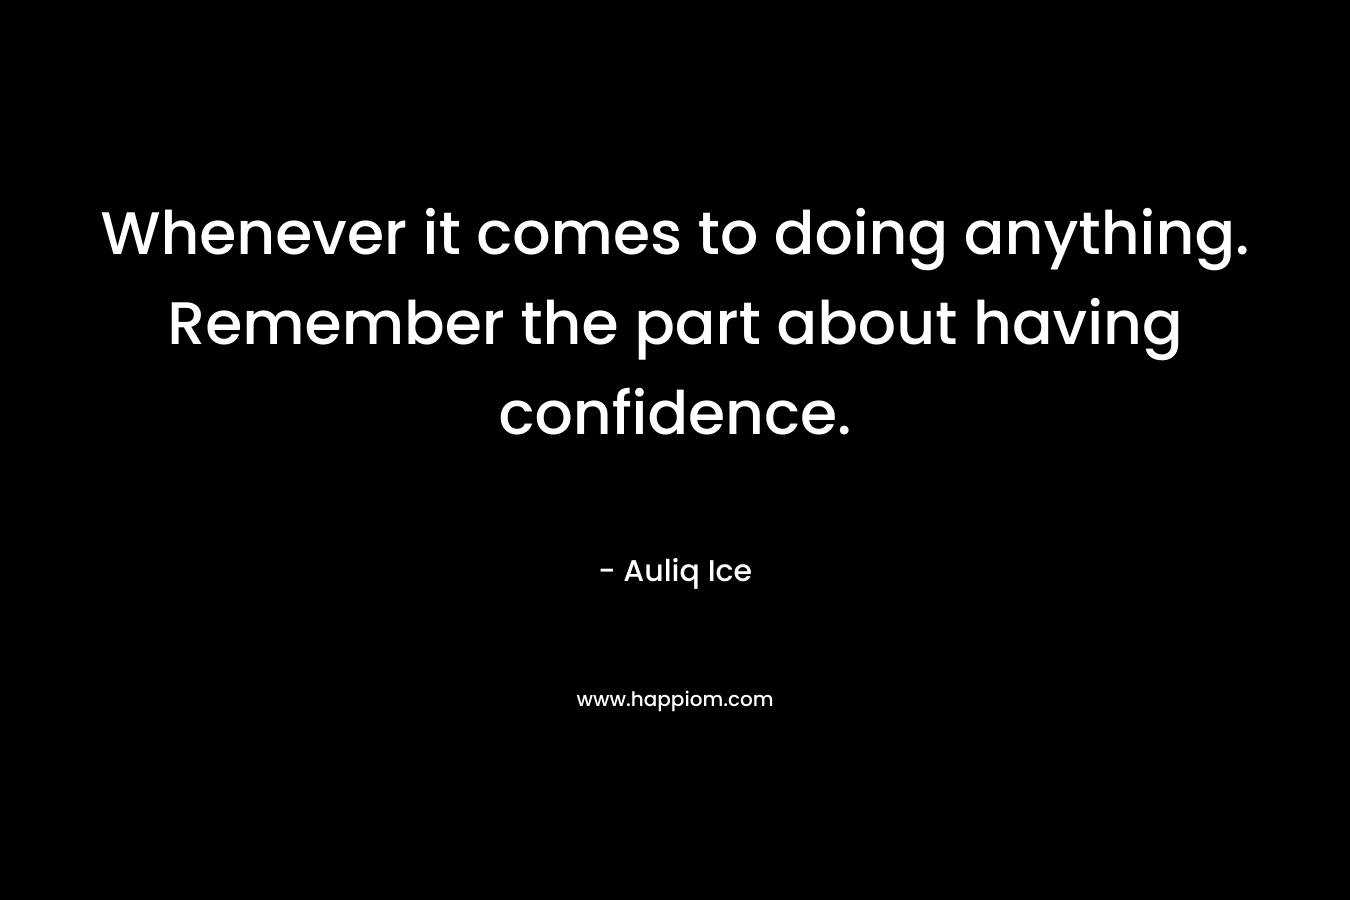 Whenever it comes to doing anything. Remember the part about having confidence.